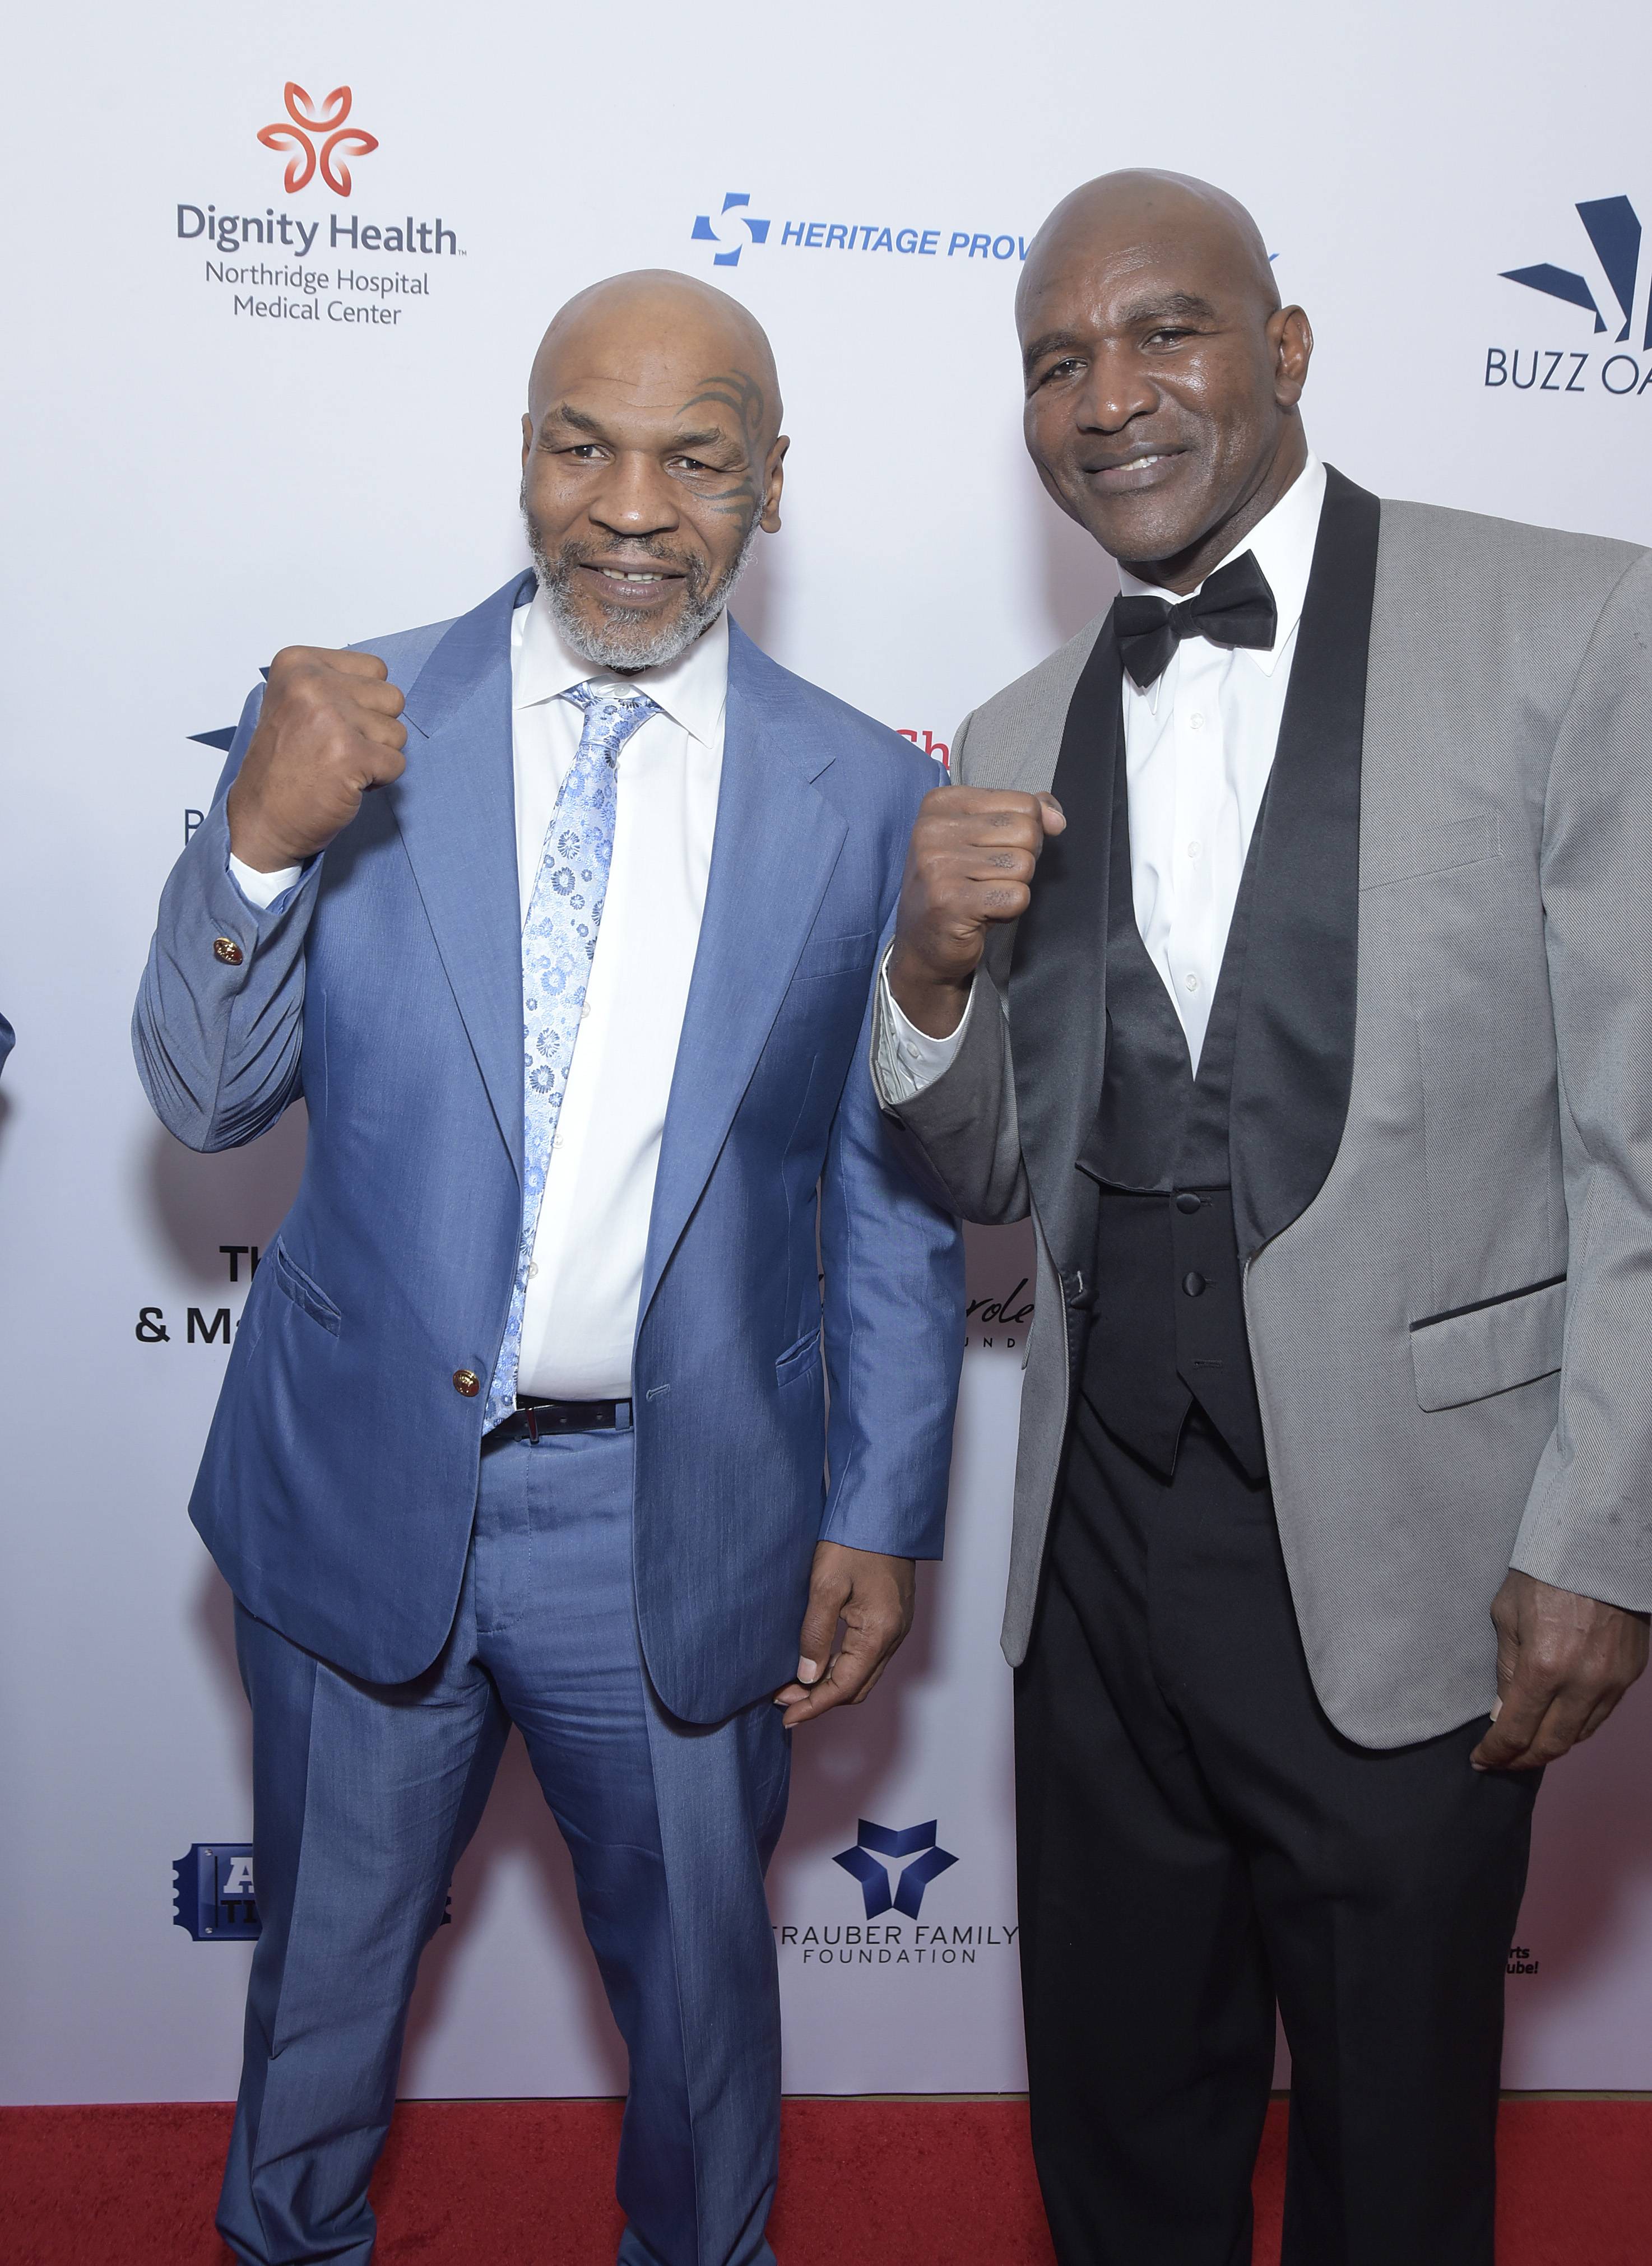 BEVERLY HILLS, CALIFORNIA - AUGUST 09: Heavyweight boxing legends Mike Tyson and Evander Holyfield attend the 19th annual Harold and Carole Pump Foundation Gala at The Beverly Hilton Hotel on August 09, 2019 in Beverly Hills, California. (Photo by Michael Tullberg/Getty Images)